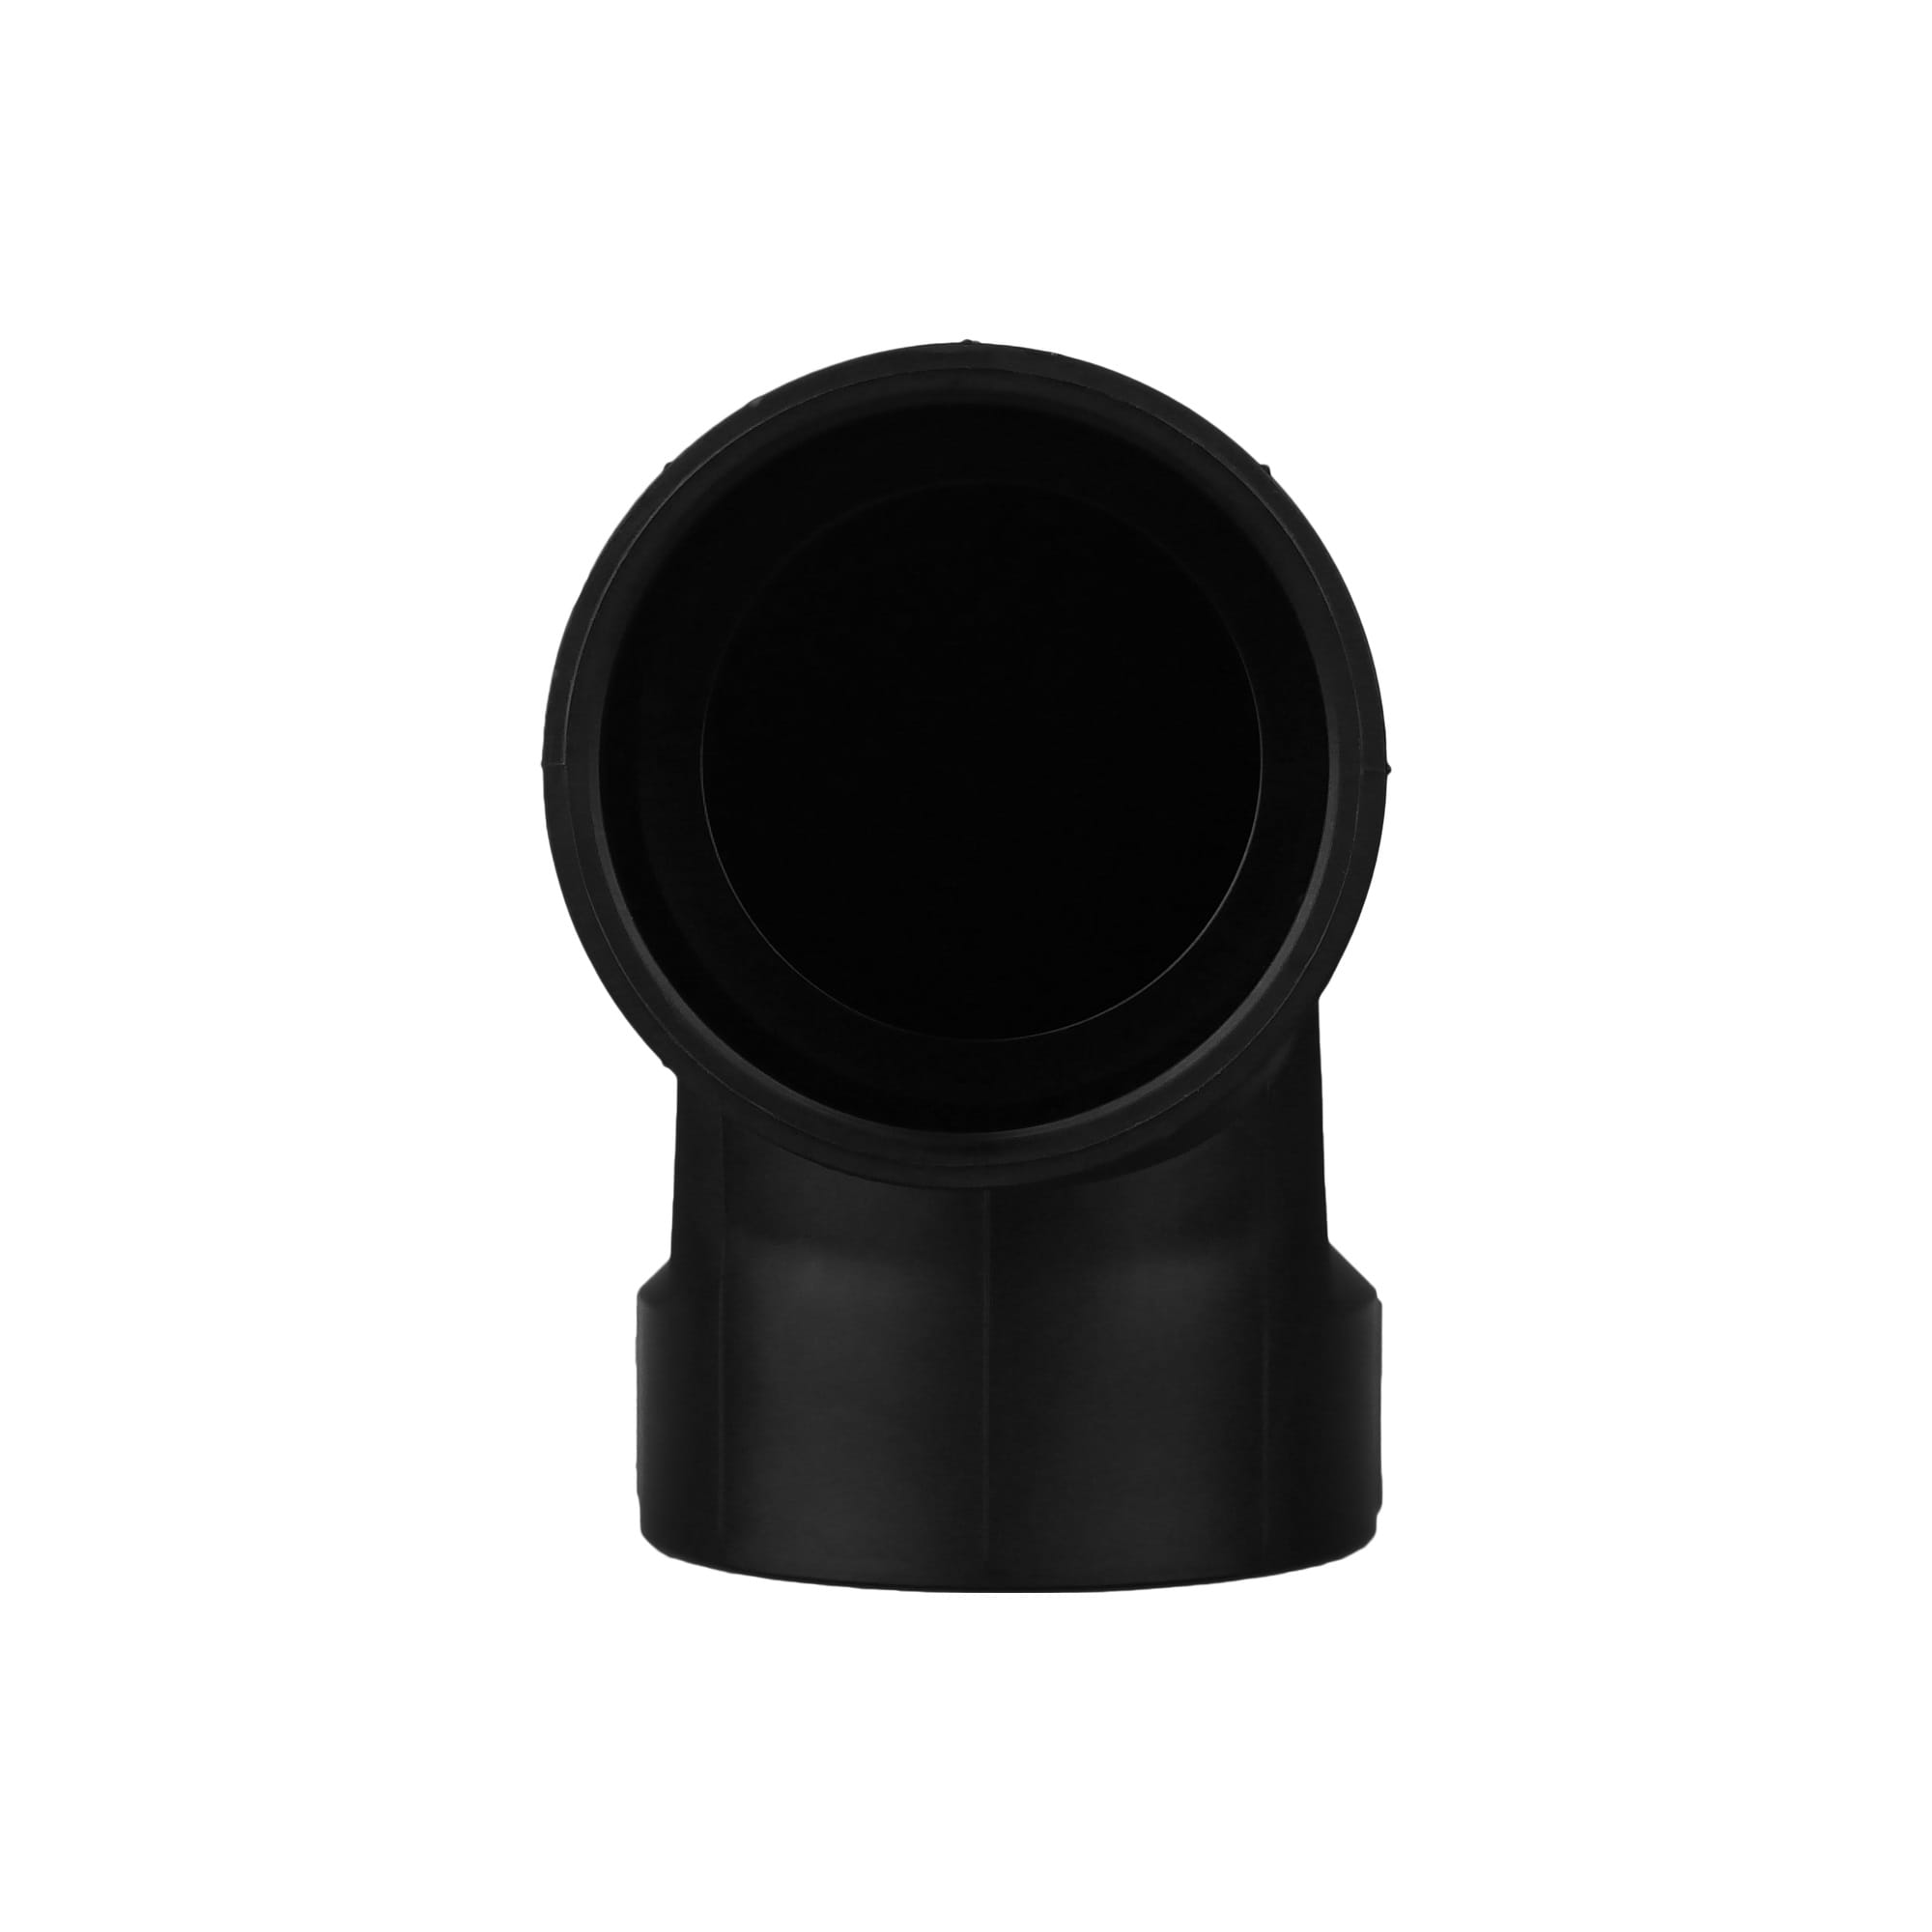 Charlotte Pipe The 2-in ABS DWV Black Elbow for Non-Potable Water -  Schedule 40, NSF Safety Listed, ASTM Approved in the ABS DWV Pipe & Fittings  department at